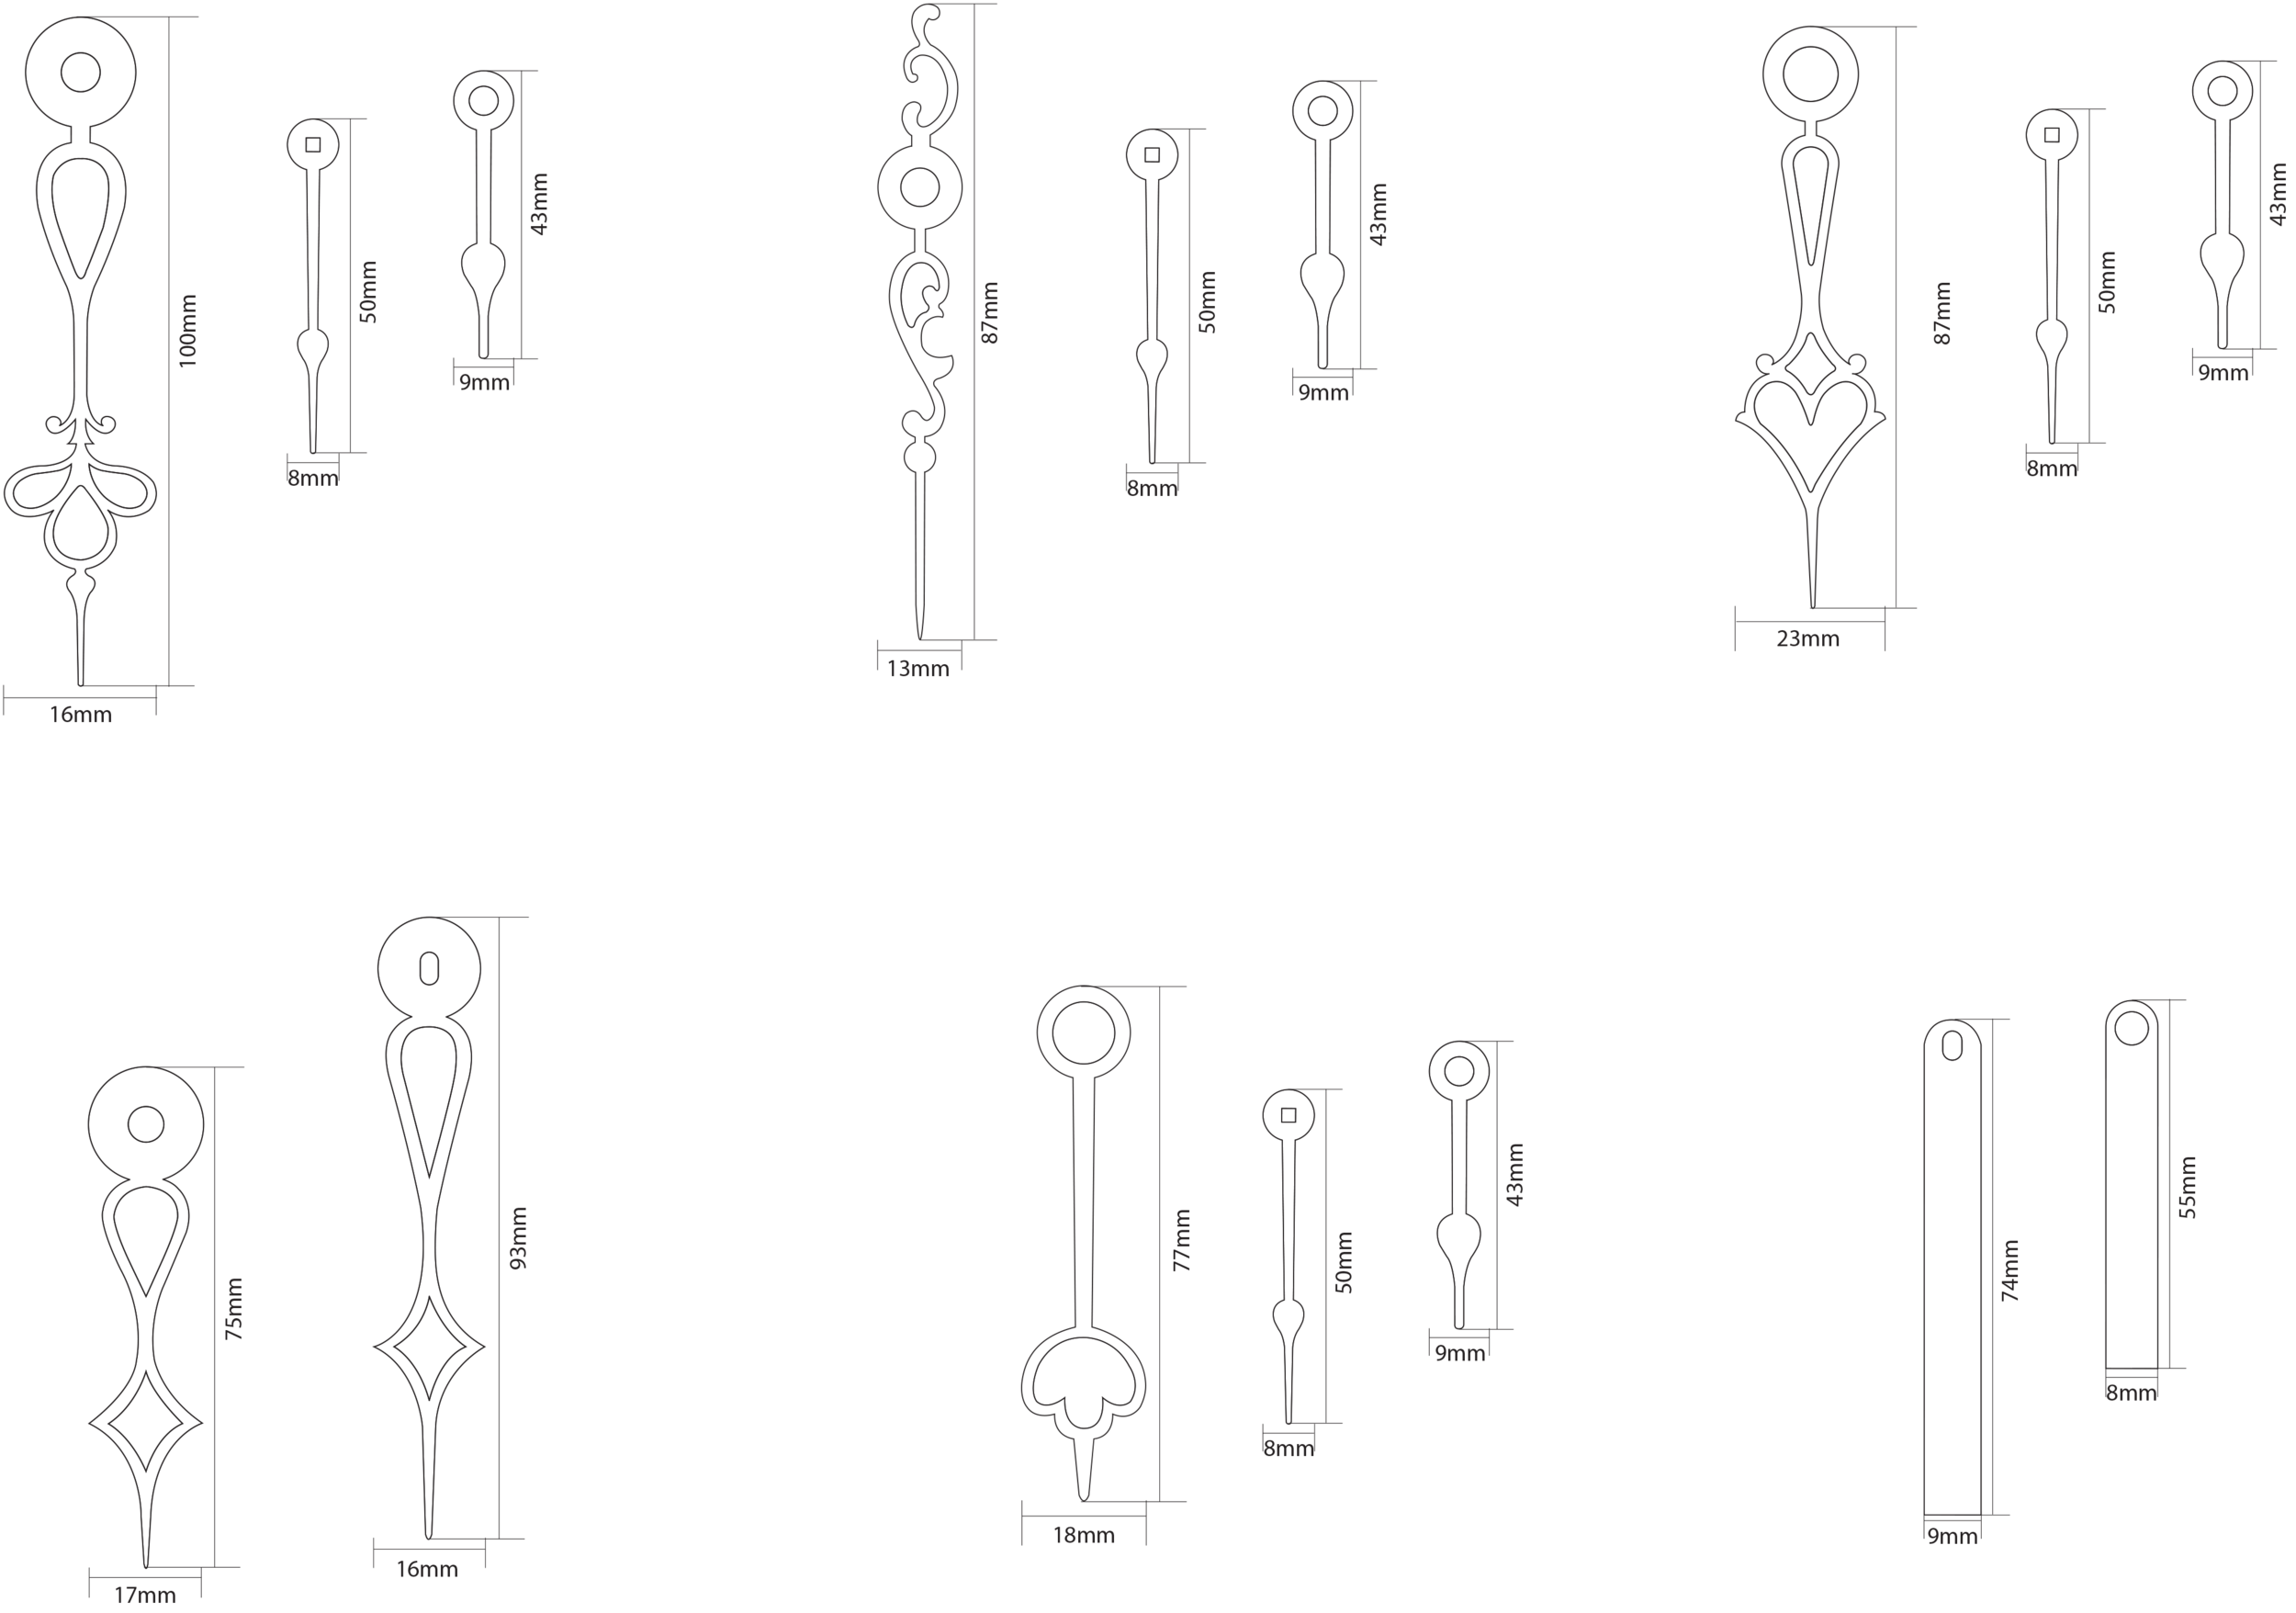 final designs_dimensioned - ELB.png